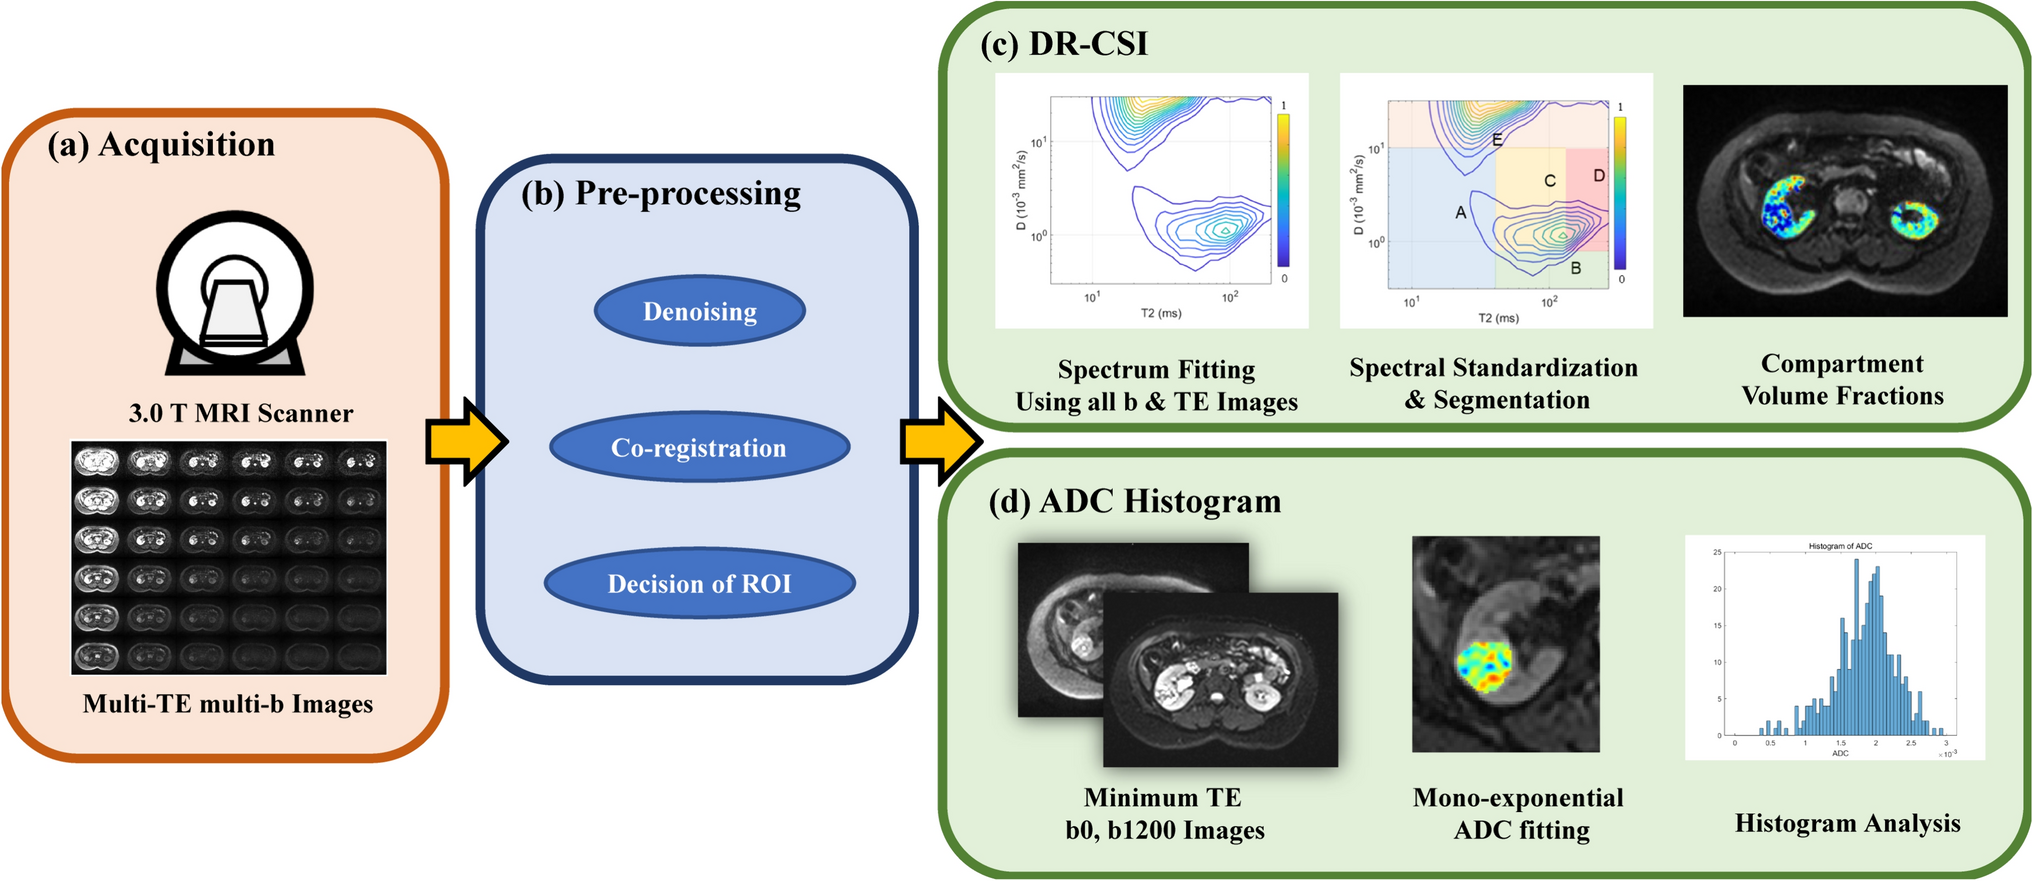 To characterize small renal cell carcinoma using diffusion relaxation correlation spectroscopic imaging and apparent diffusion coefficient based histogram analysis: a preliminary study